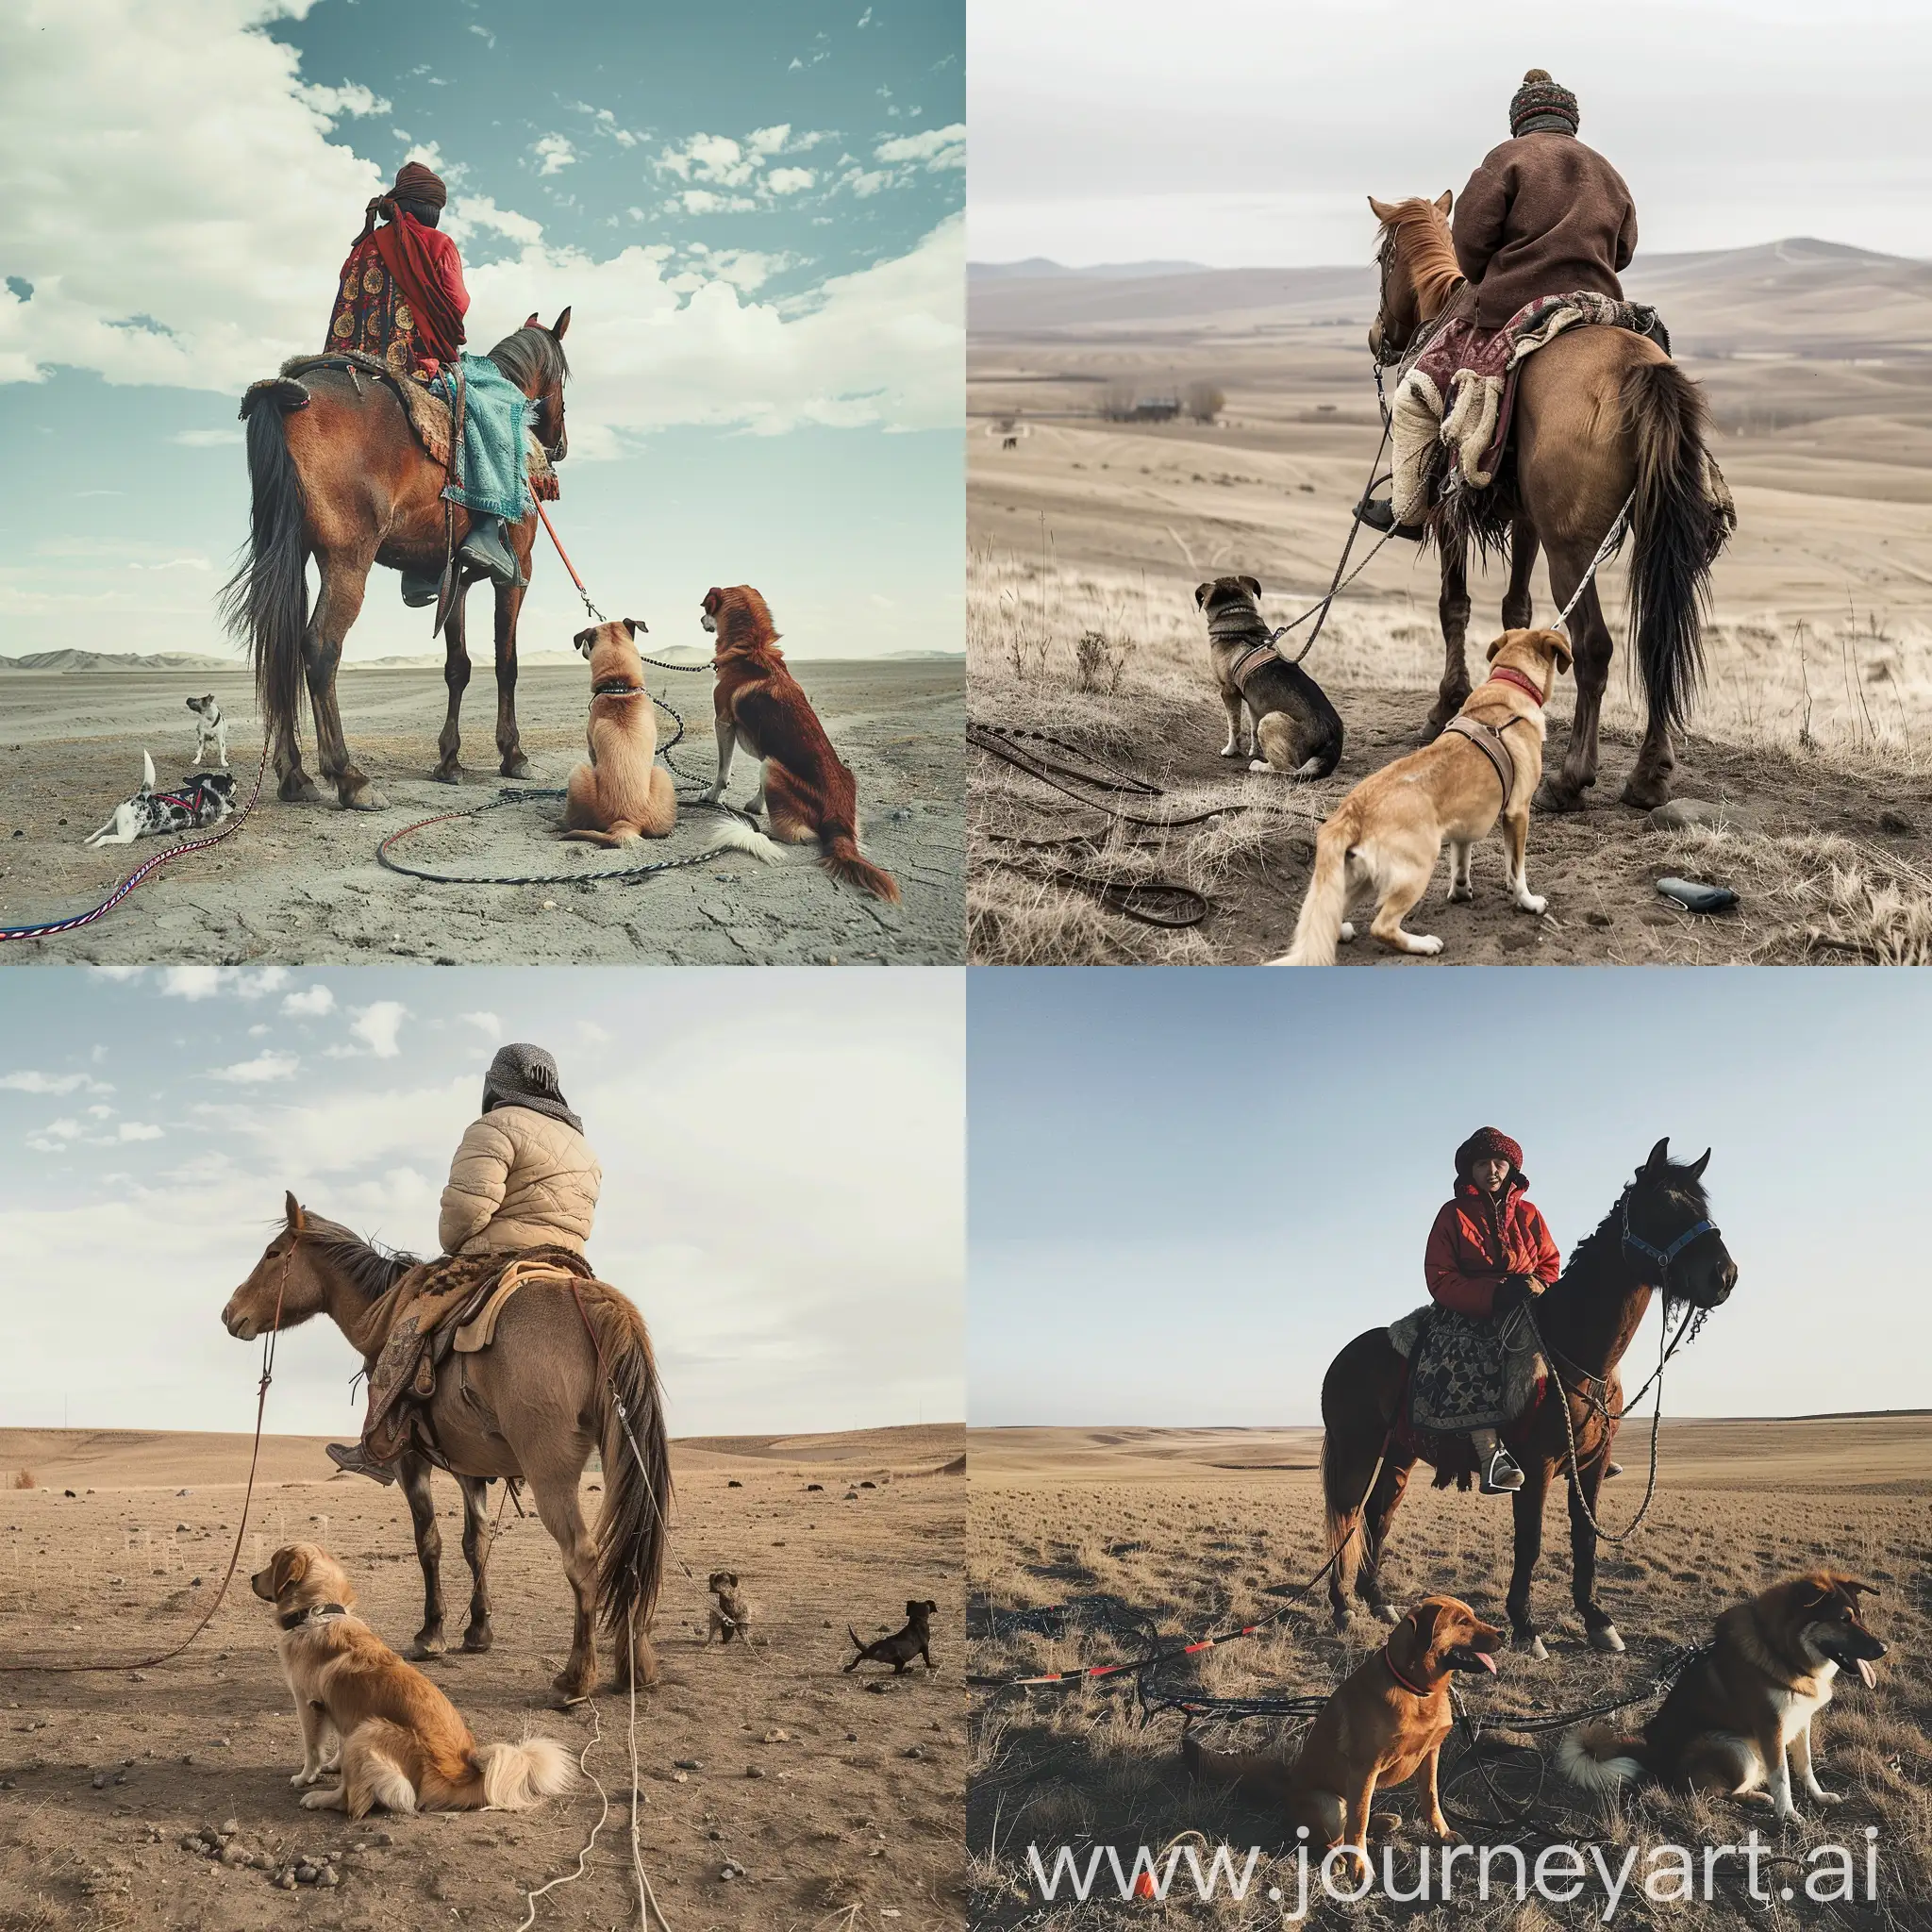 Kazakh-Person-Riding-Horse-with-Two-Leashed-Dogs